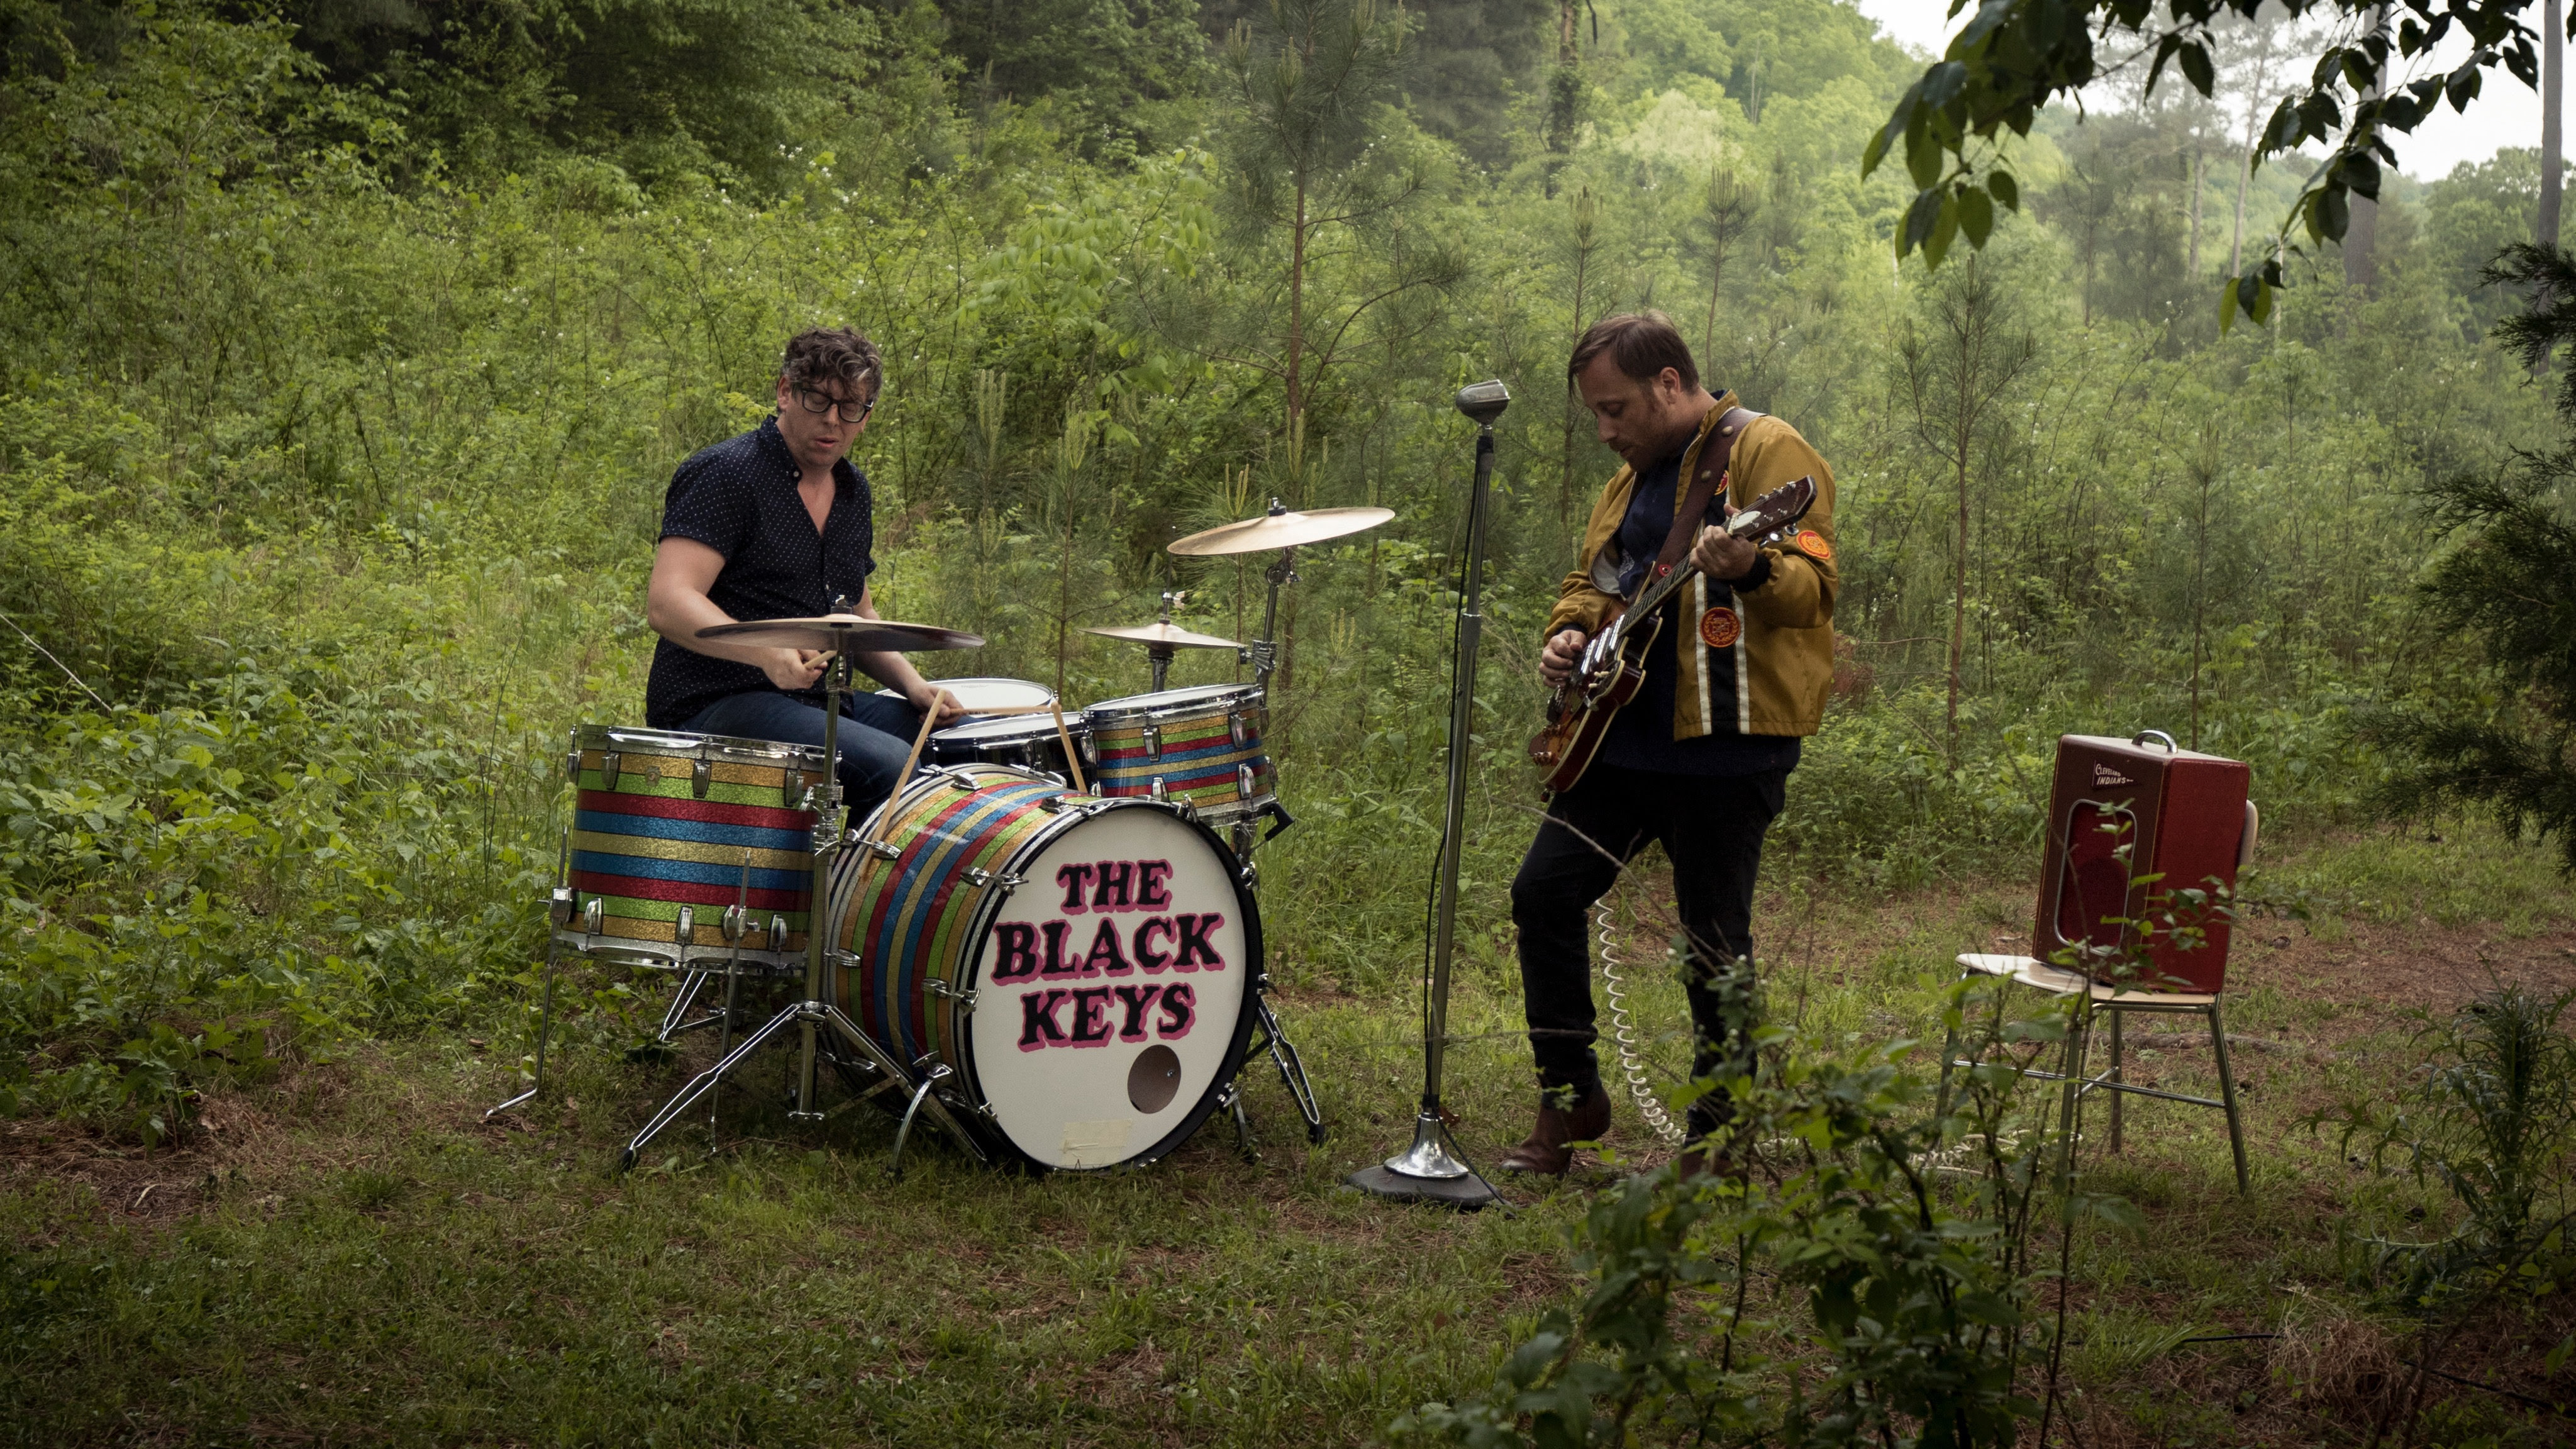 The Black Keys have shared a new music video “Go.”